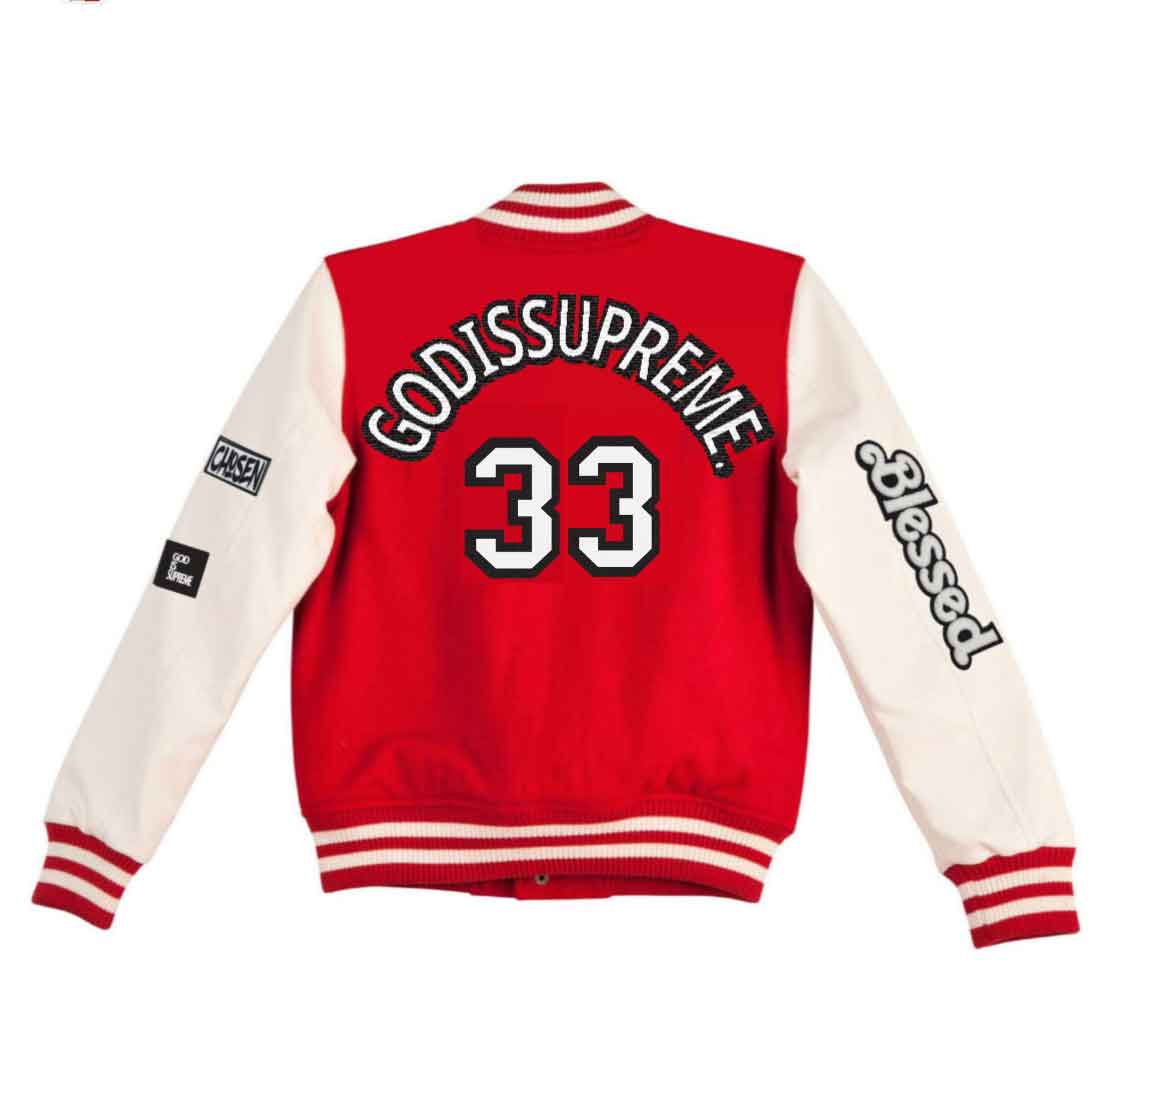 THE BEST Supreme Luxury Brand Basic Color Red White Bomber Jacket Limited  Edition